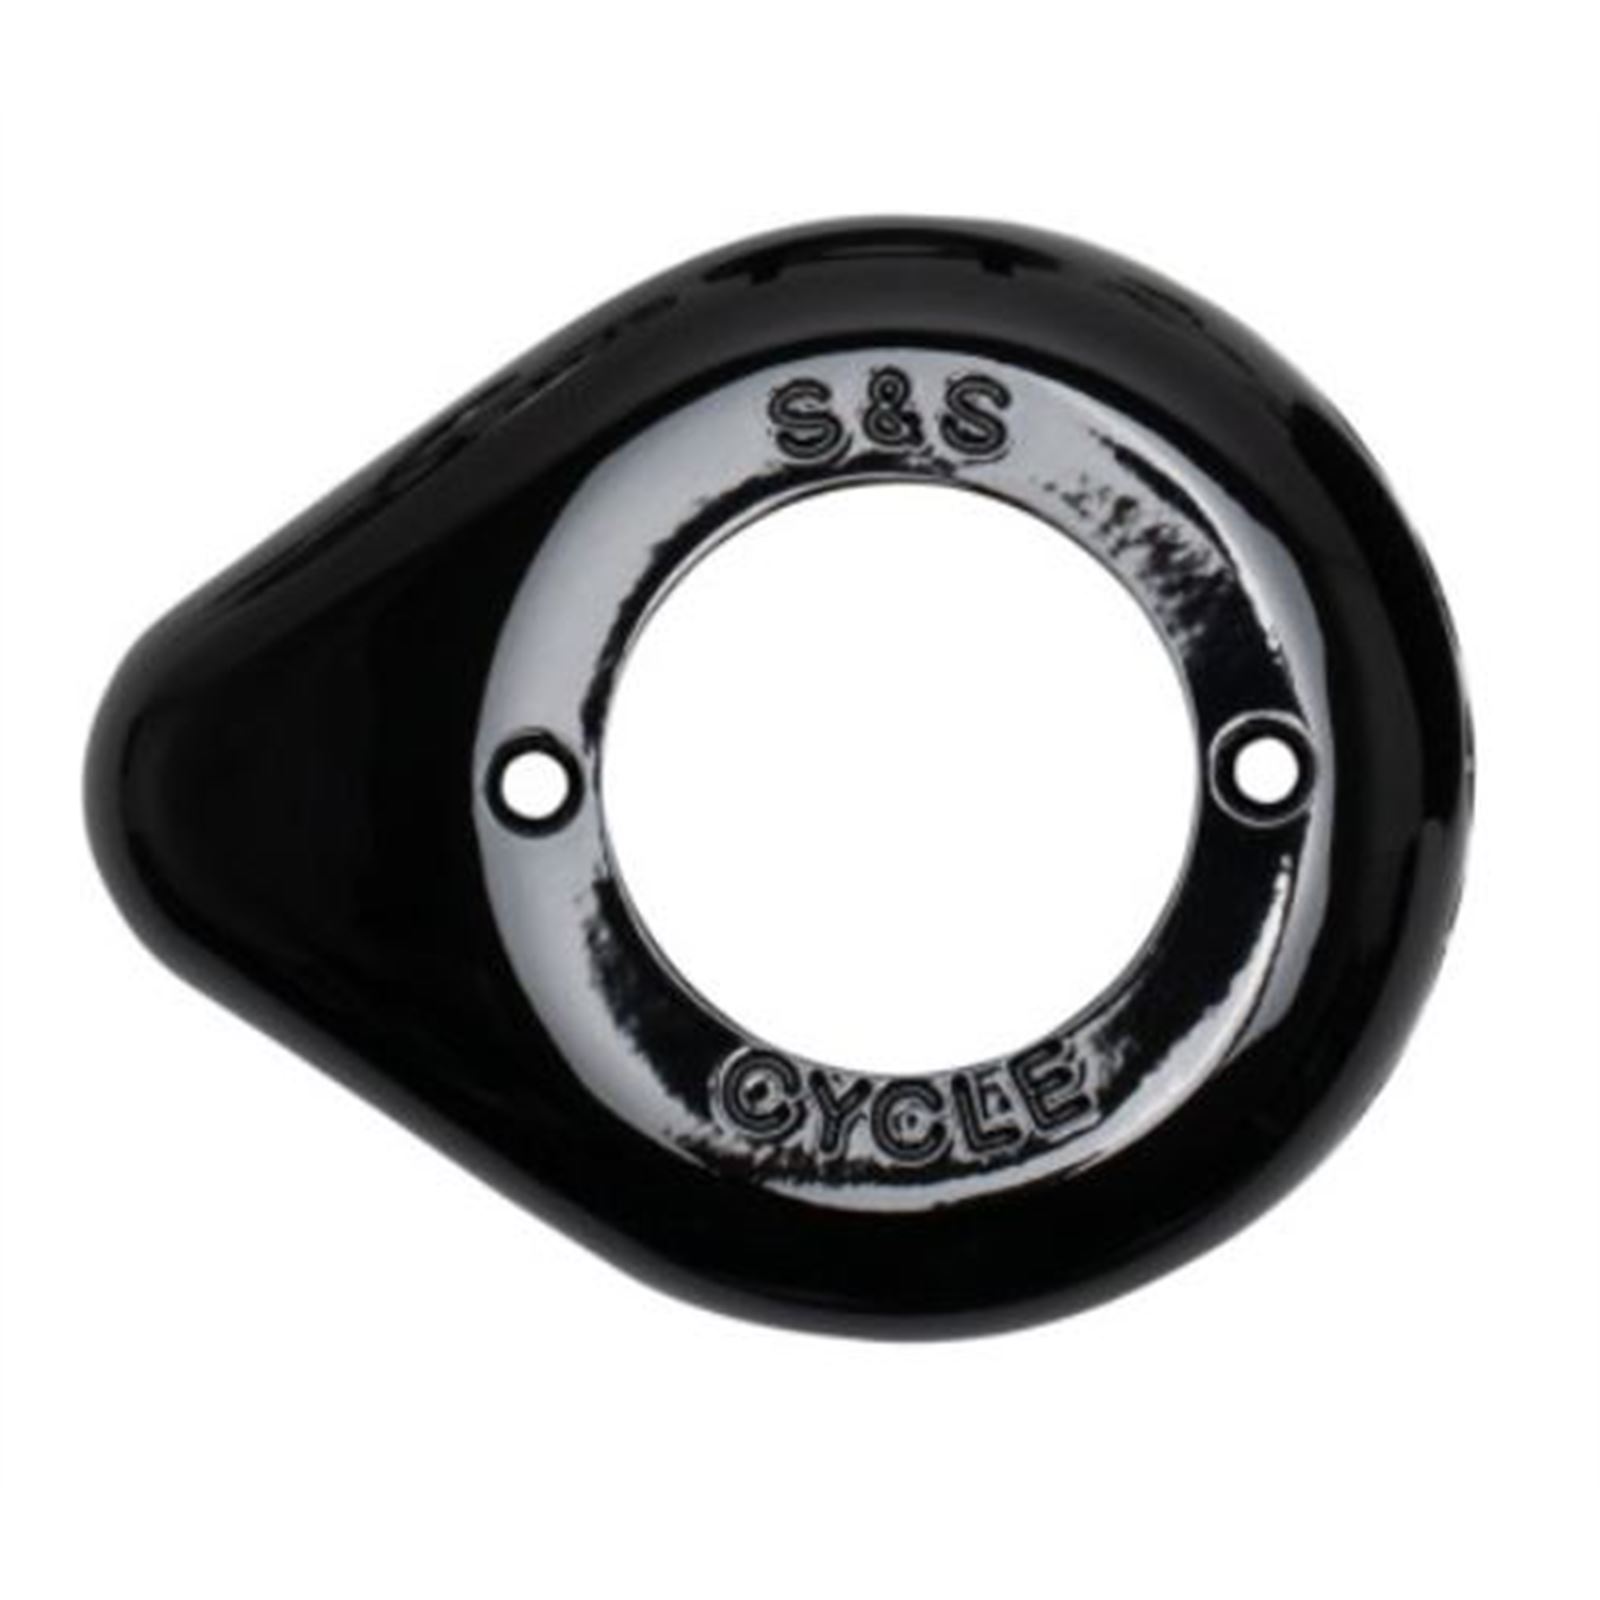 S&S Cycle Cover - Air Cleaner